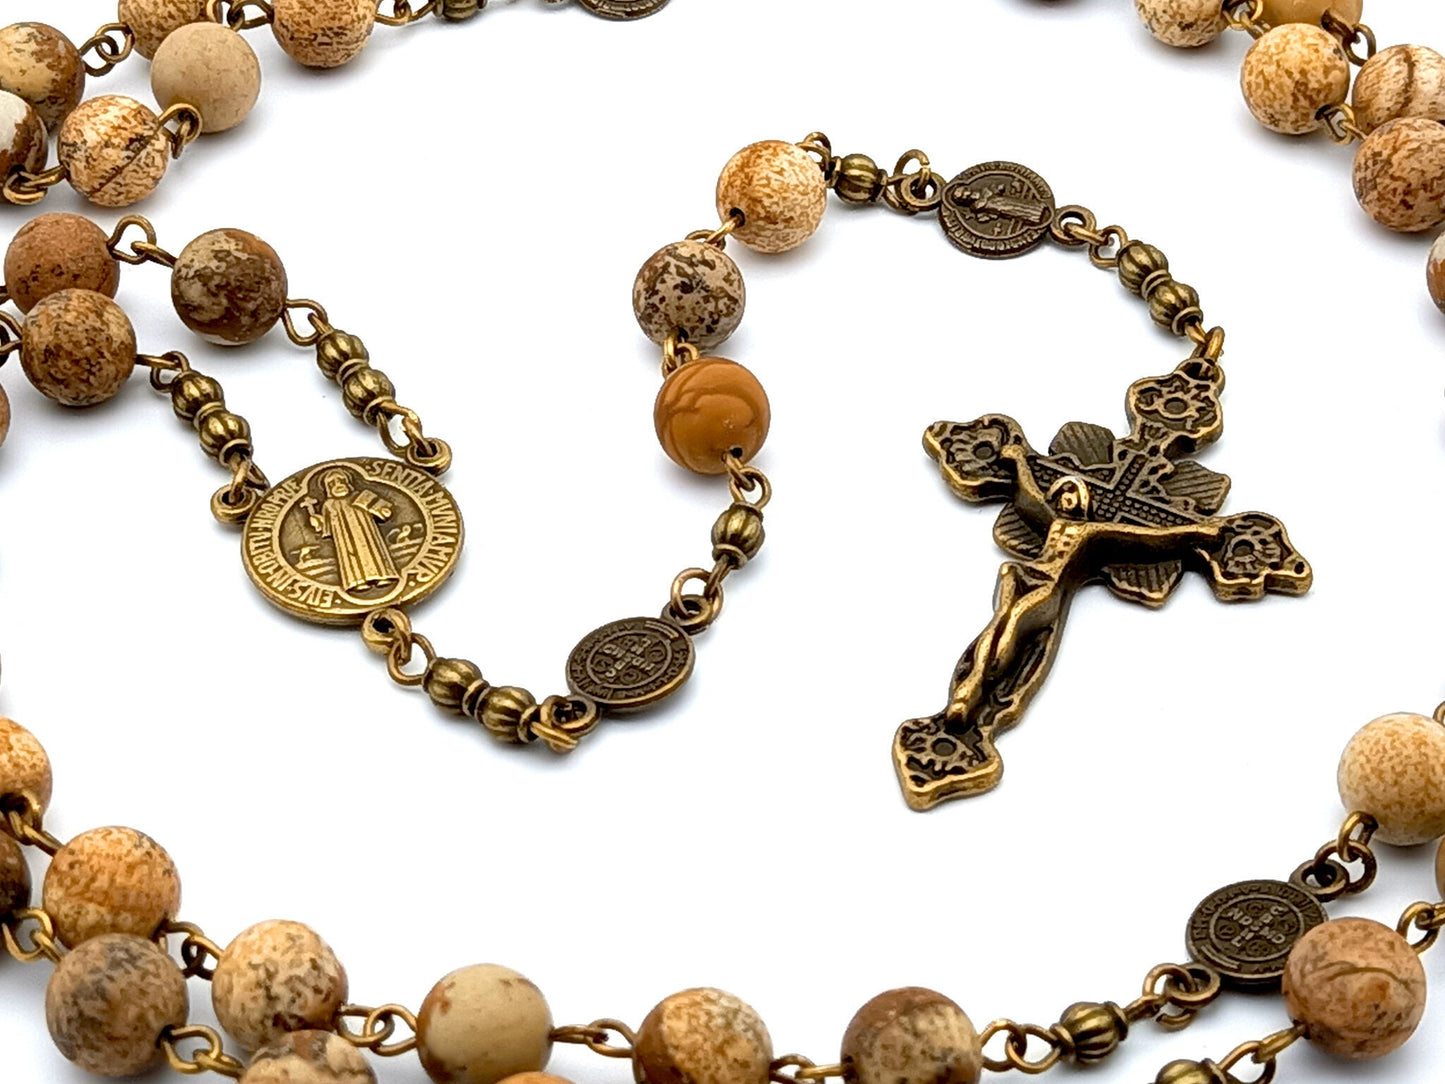 Saint Benedict unique rosary beads with natural jasper gemstone beads, bronze crucifix, pater beads and centre medal.